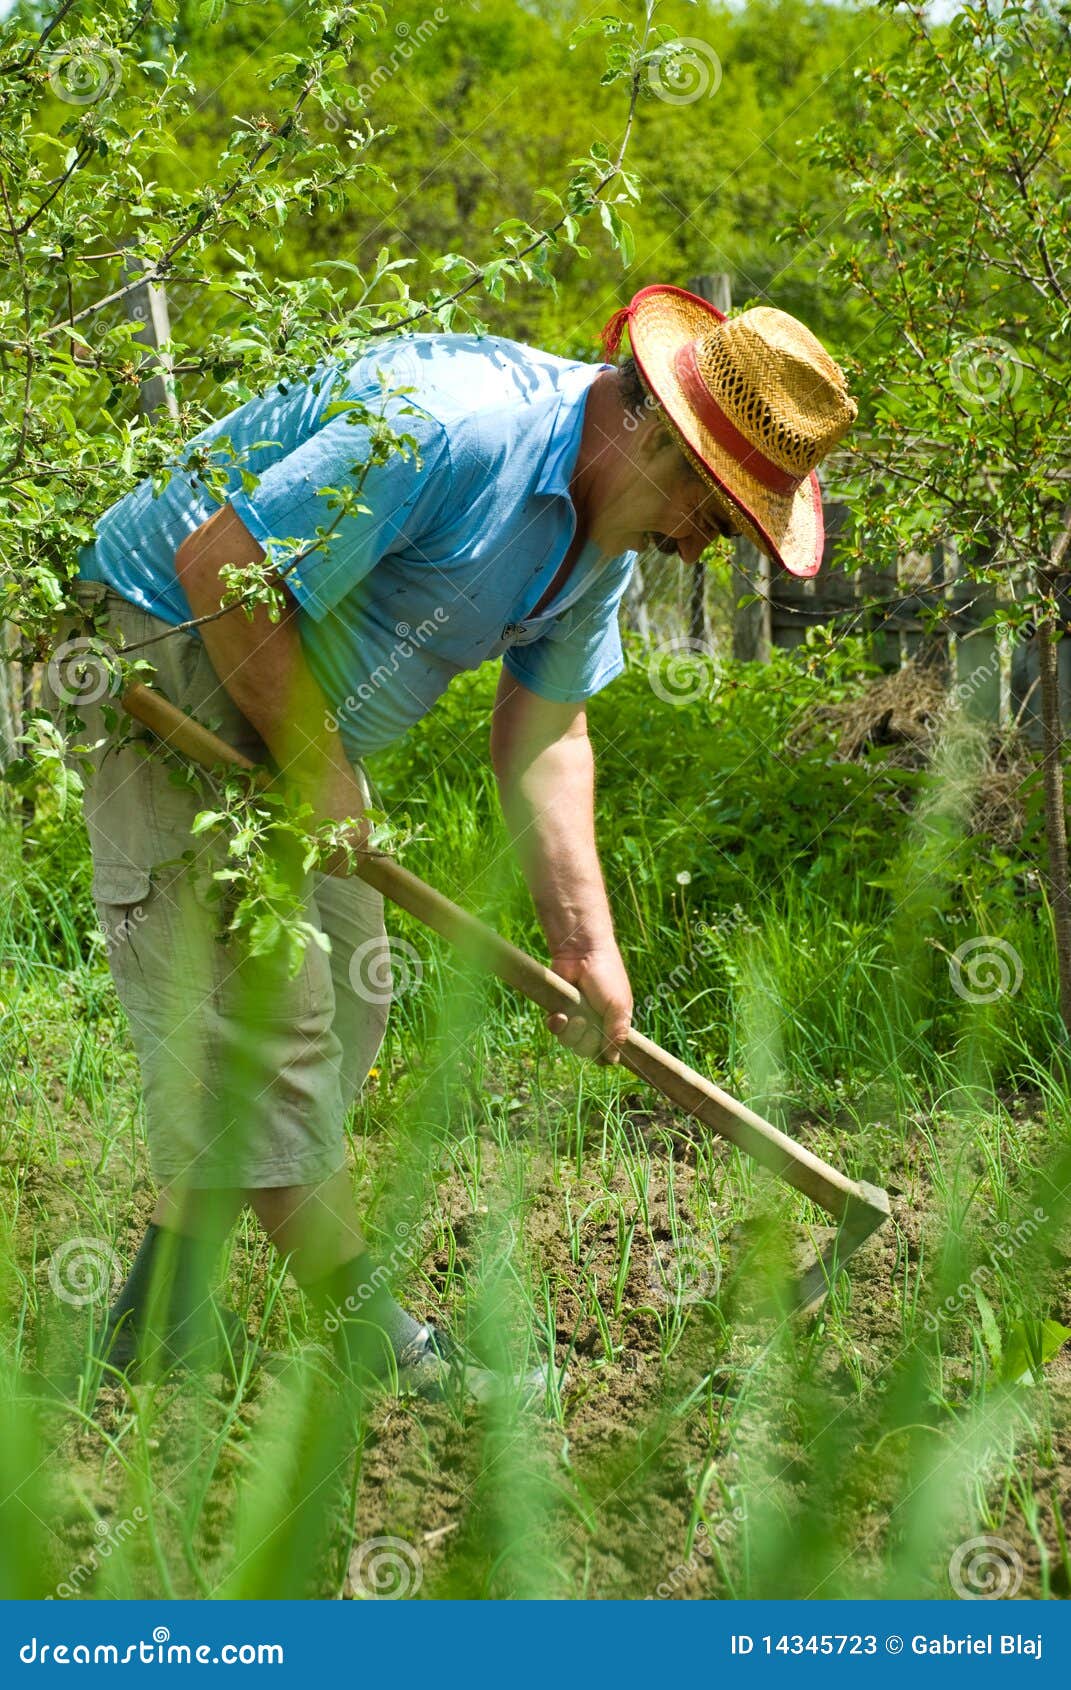 peasant digging in the garden